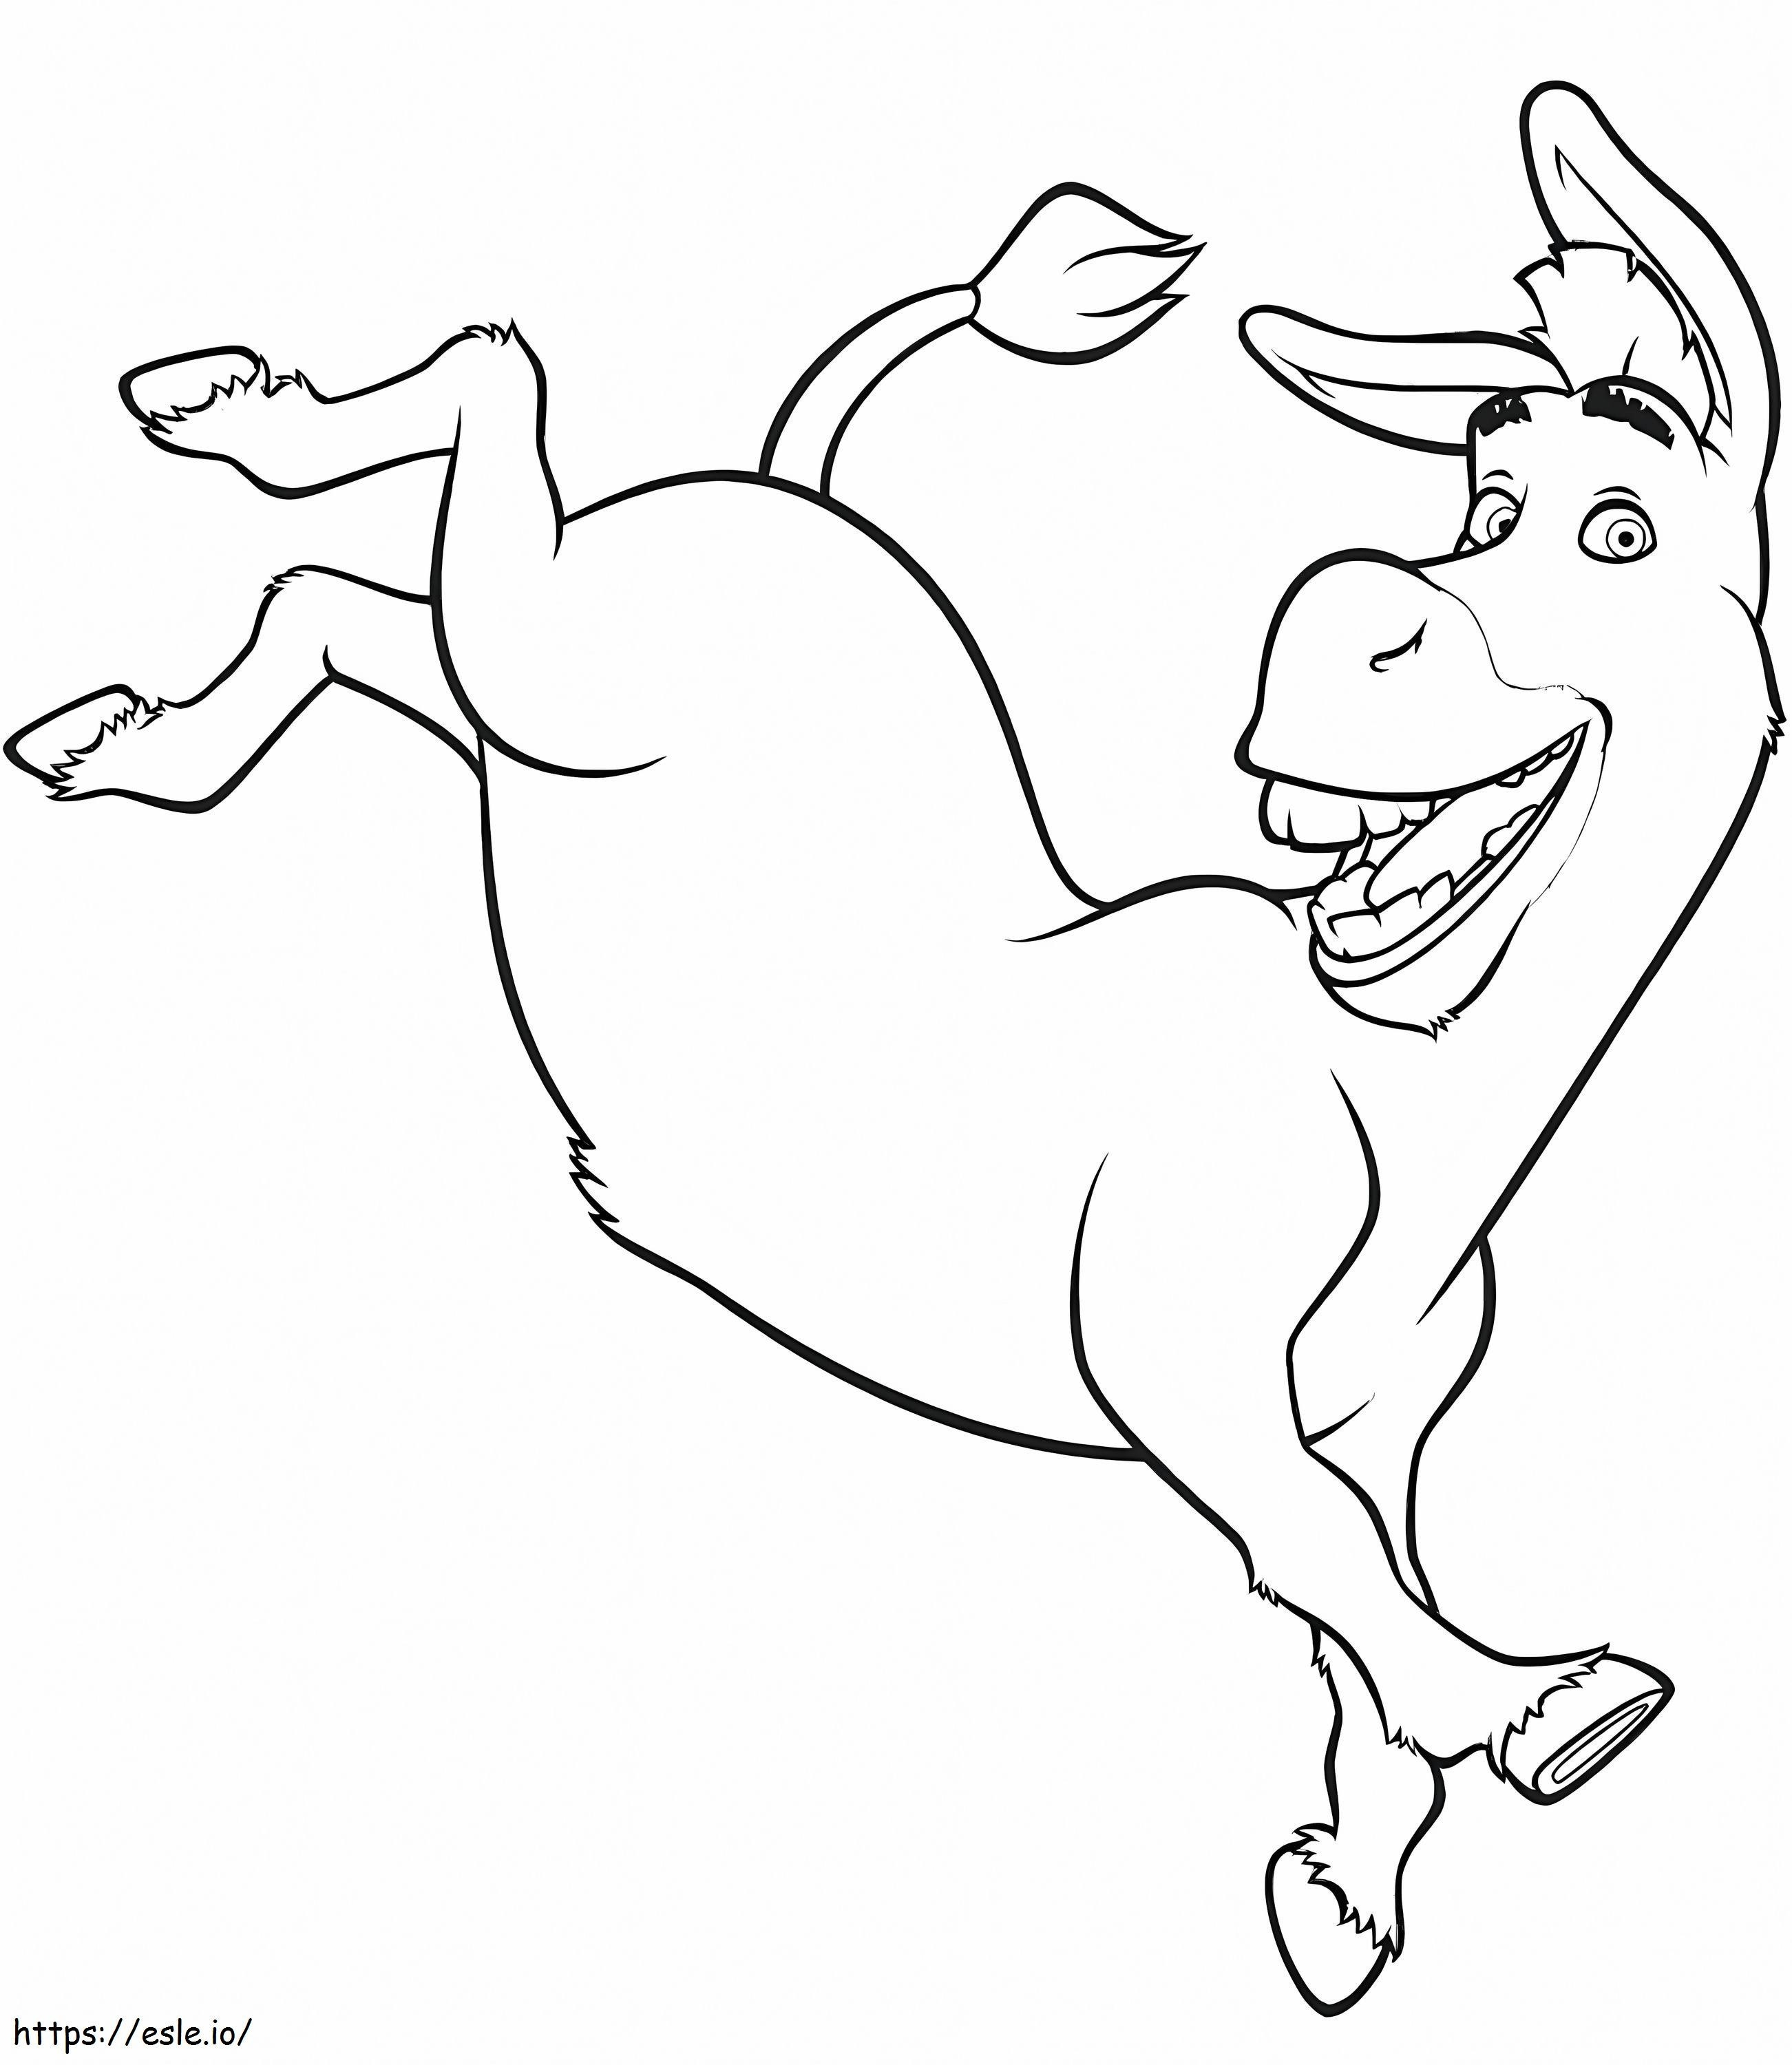 1569417264 Funny Donkey A4 coloring page